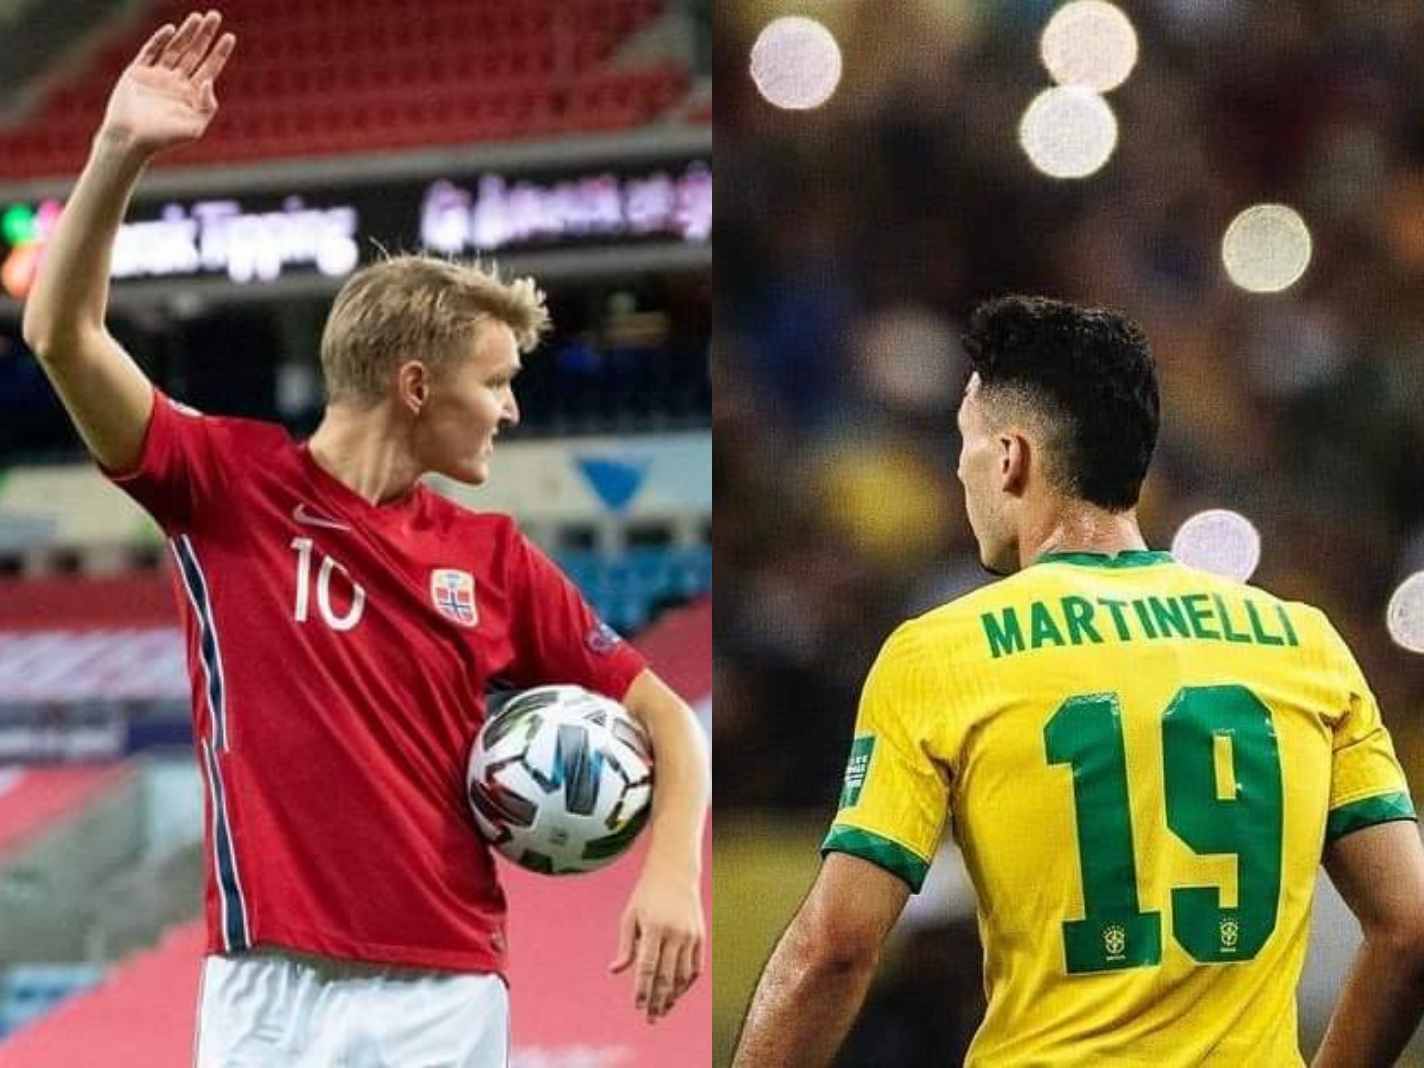 Martin Odegaard and Gabriel Martinelli - Both Arsenal players showed some flair for their national teams